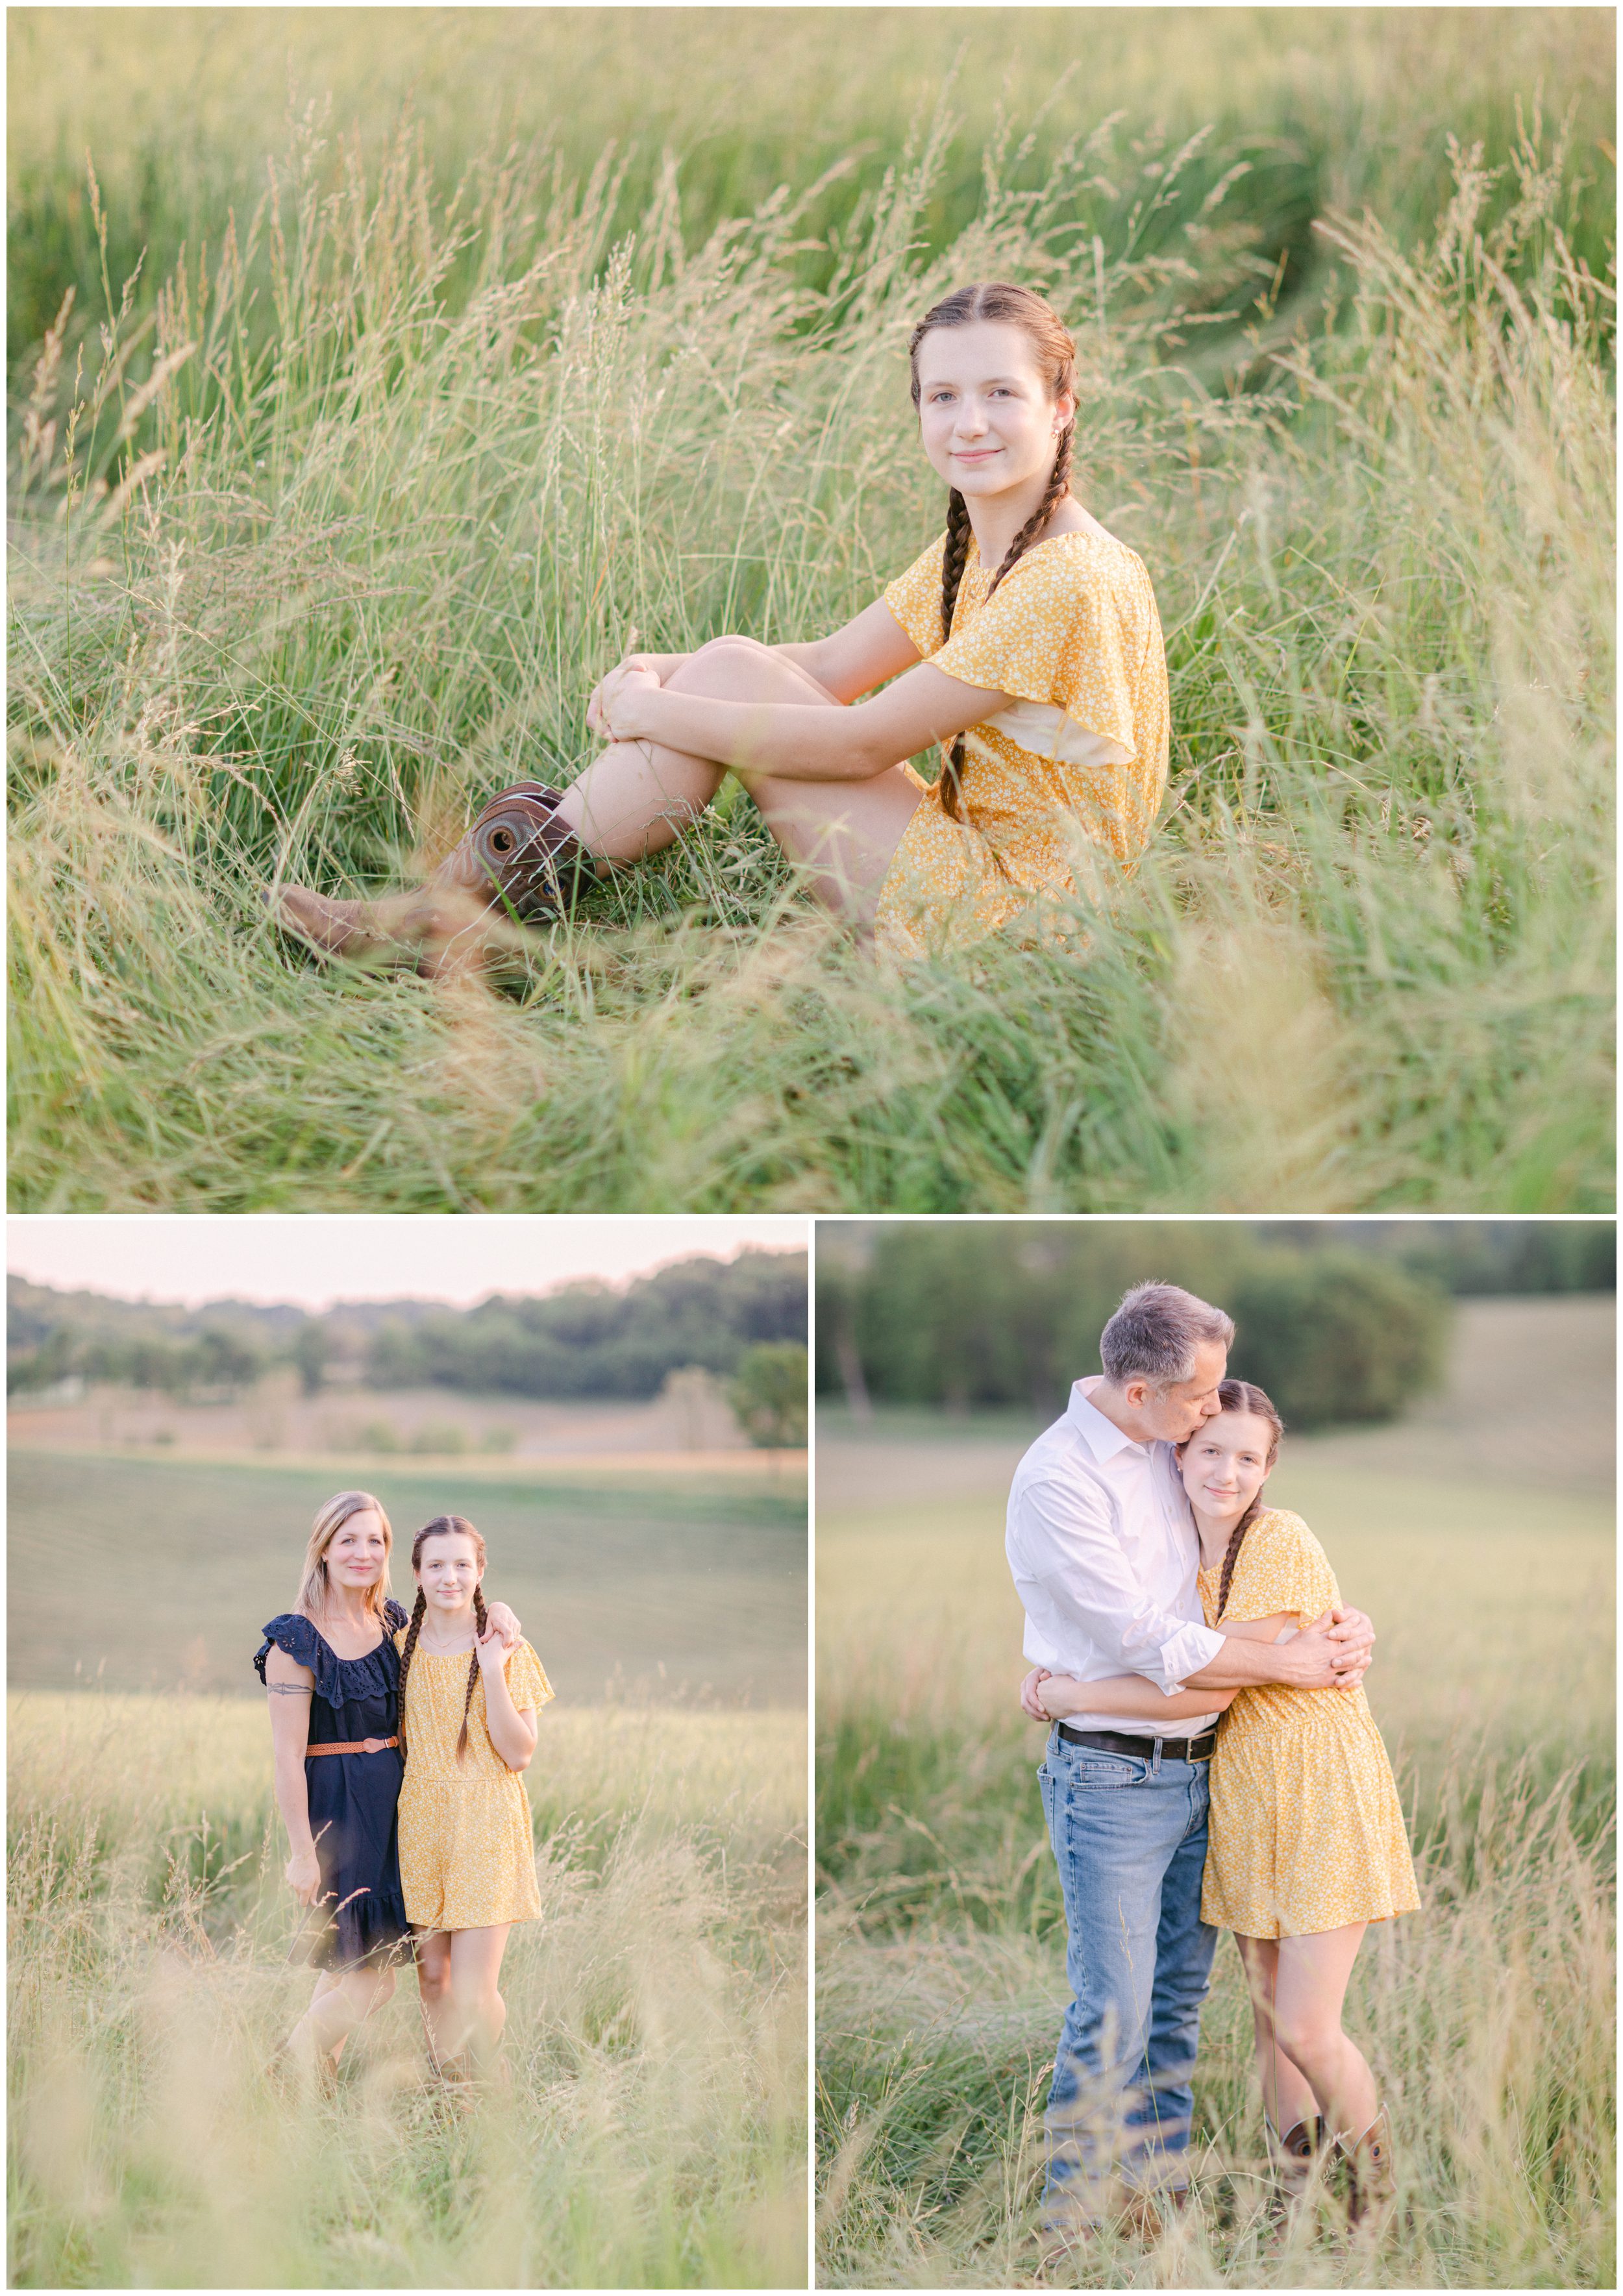 Outdoor family photography near St. Louis